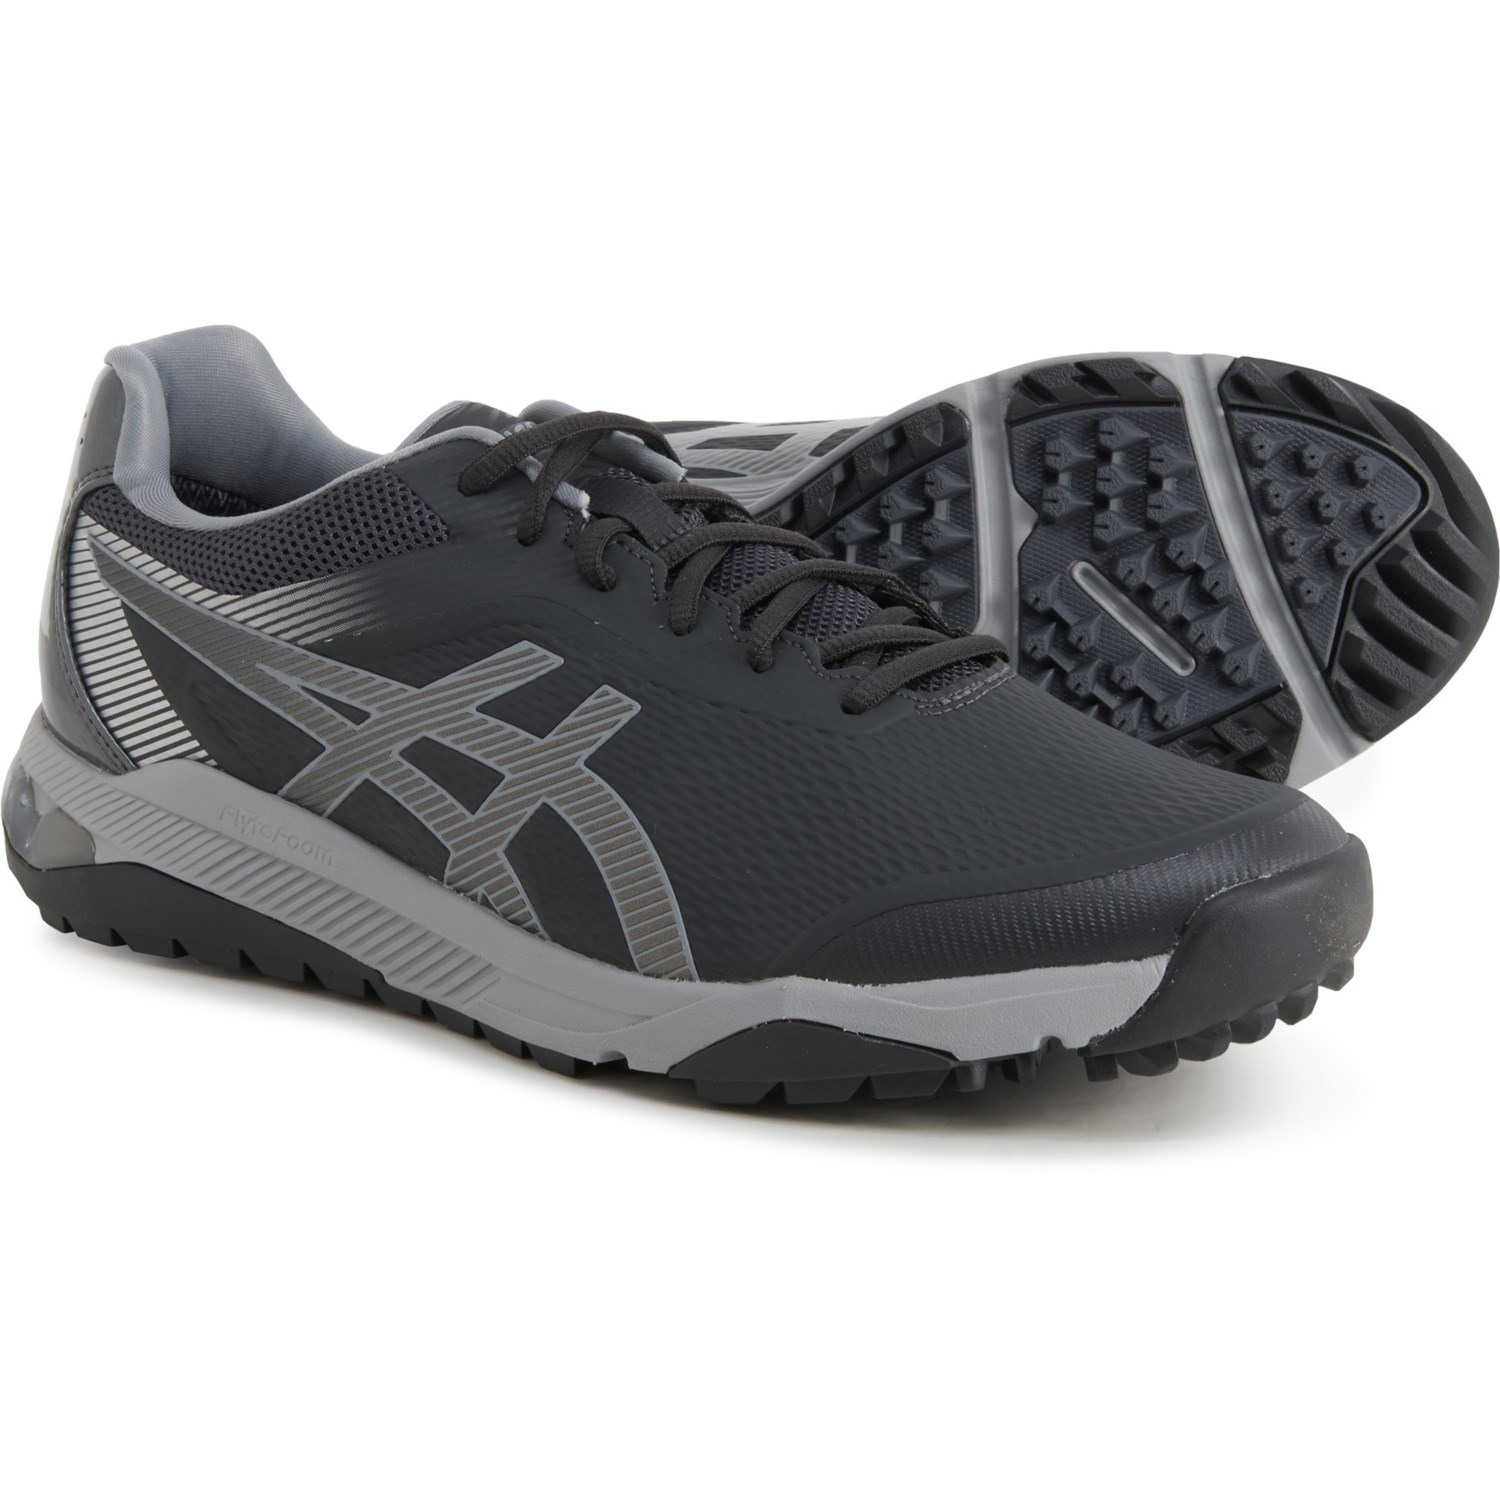 ASICS Gel-Course Ace Golf Shoes (For Men) - Save 39%